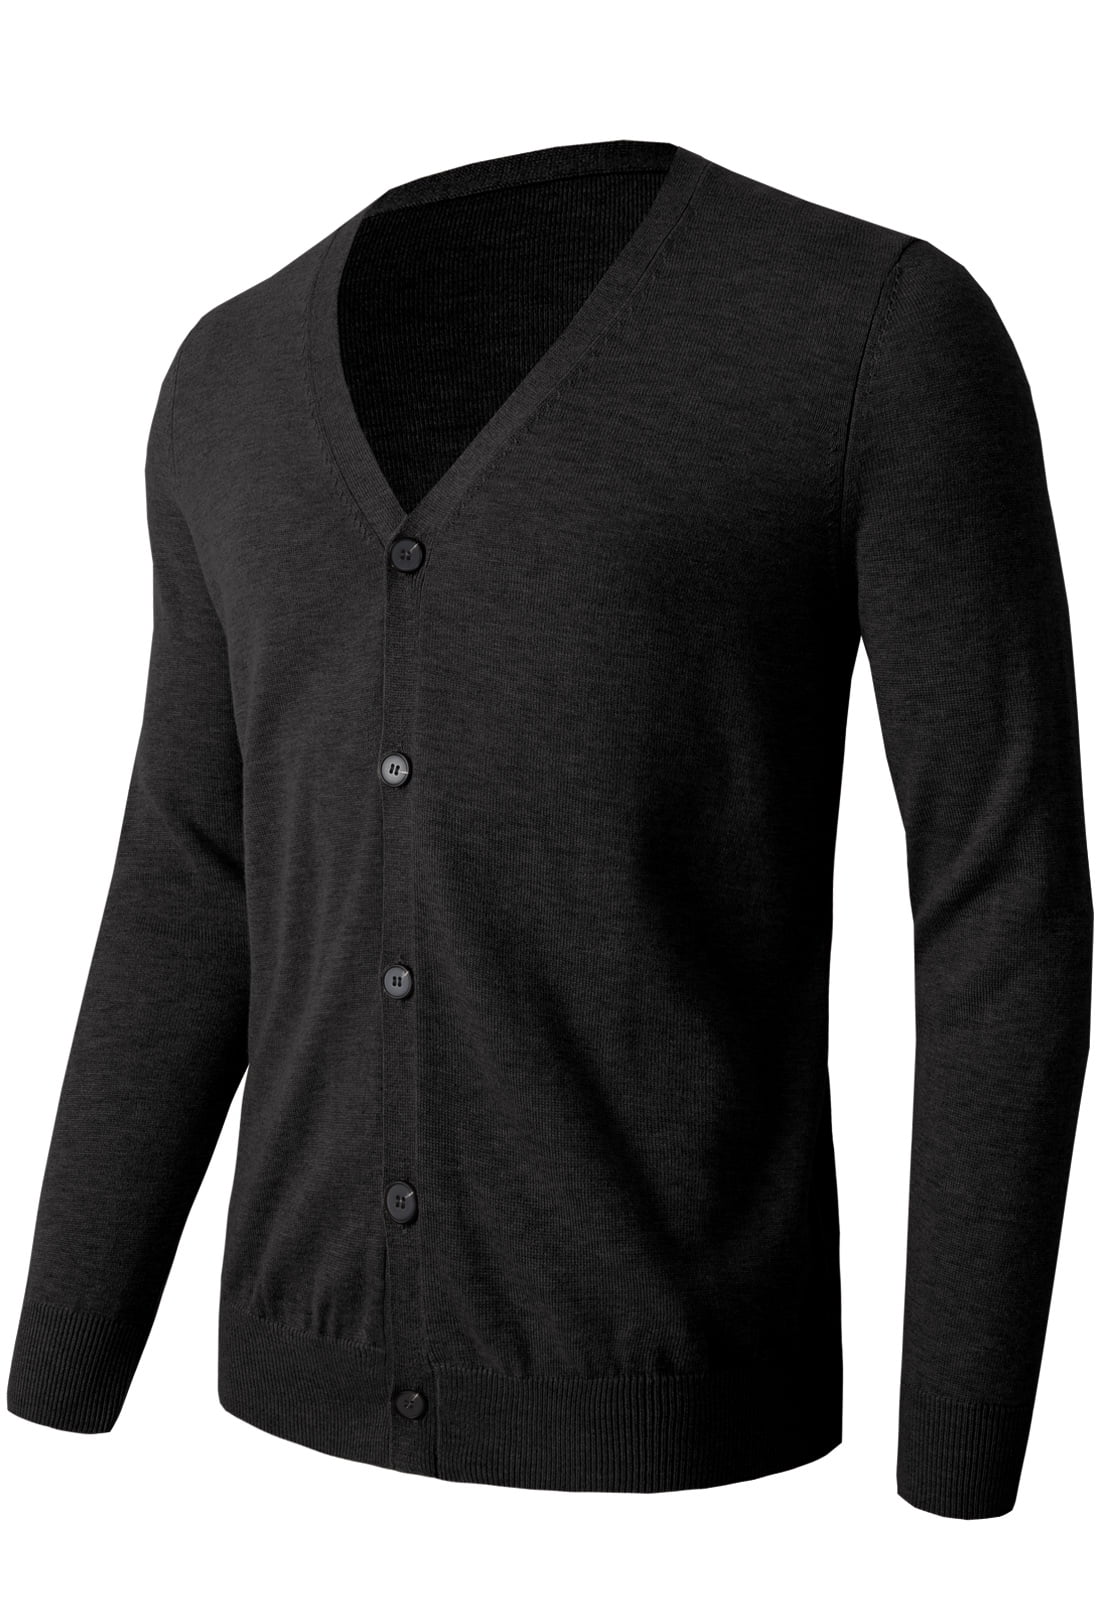 Men's Cardigan Sweater V Neck Casual Soft Long Sleeve Button Down ...